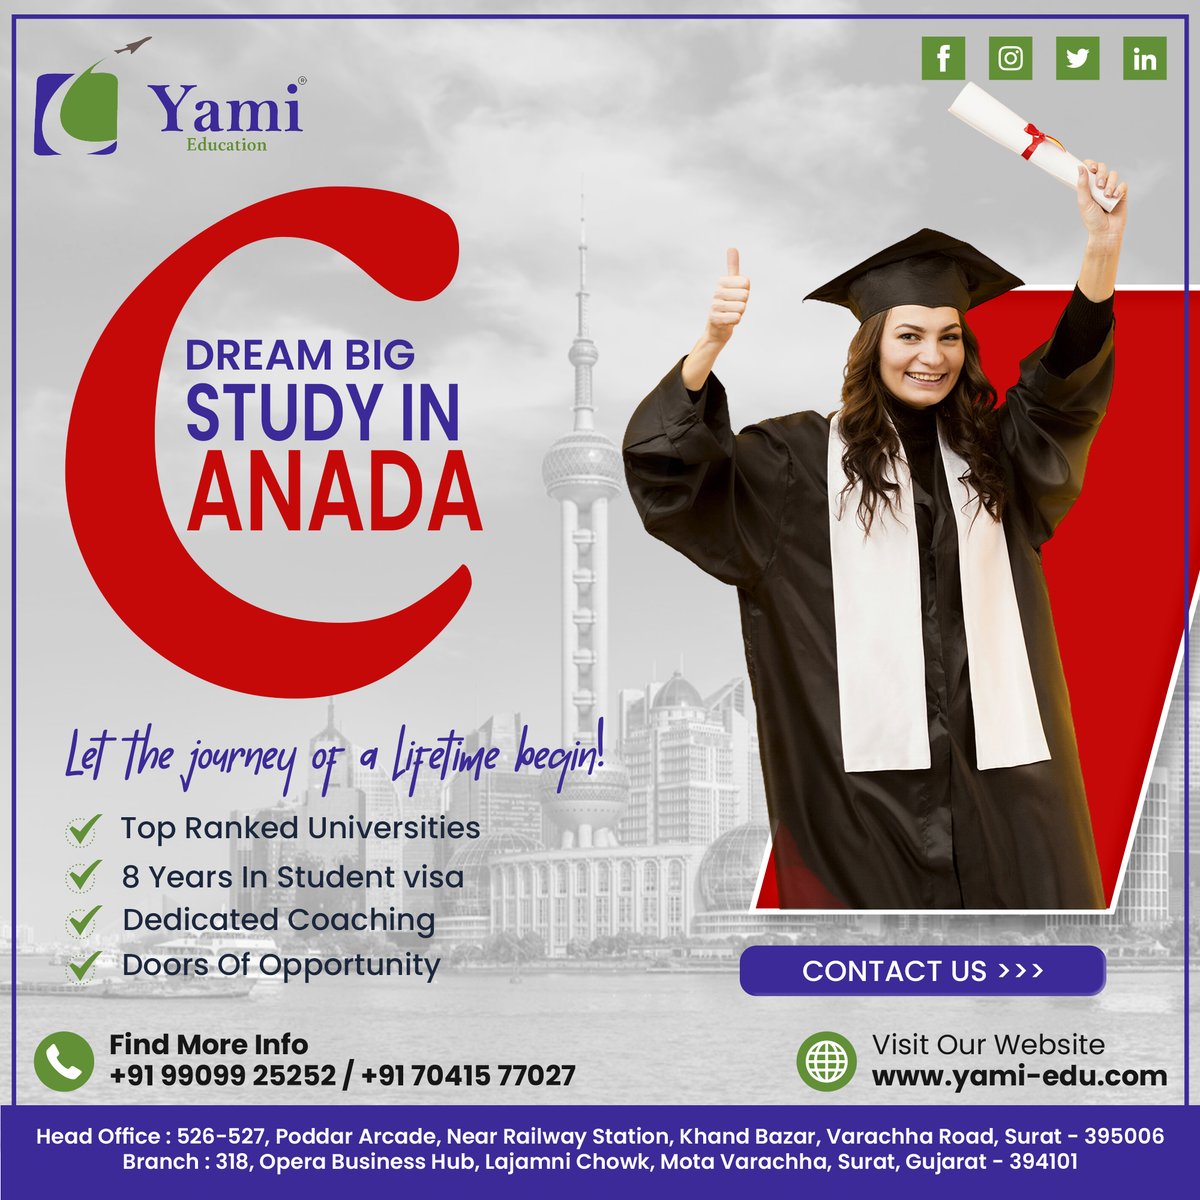 📢 Dream Big Study in Canada
➡️ Let The Journey of a Lifetime Begin!
☎️ Call us +91 99099 25252 / +91 70415 77027
🌐 Visit Our Website yami-edu.com
#yami #yamiimmigration #studyincanada #canadaeducation #canadianuniversities  #educationincanada #canadianstudentvisa